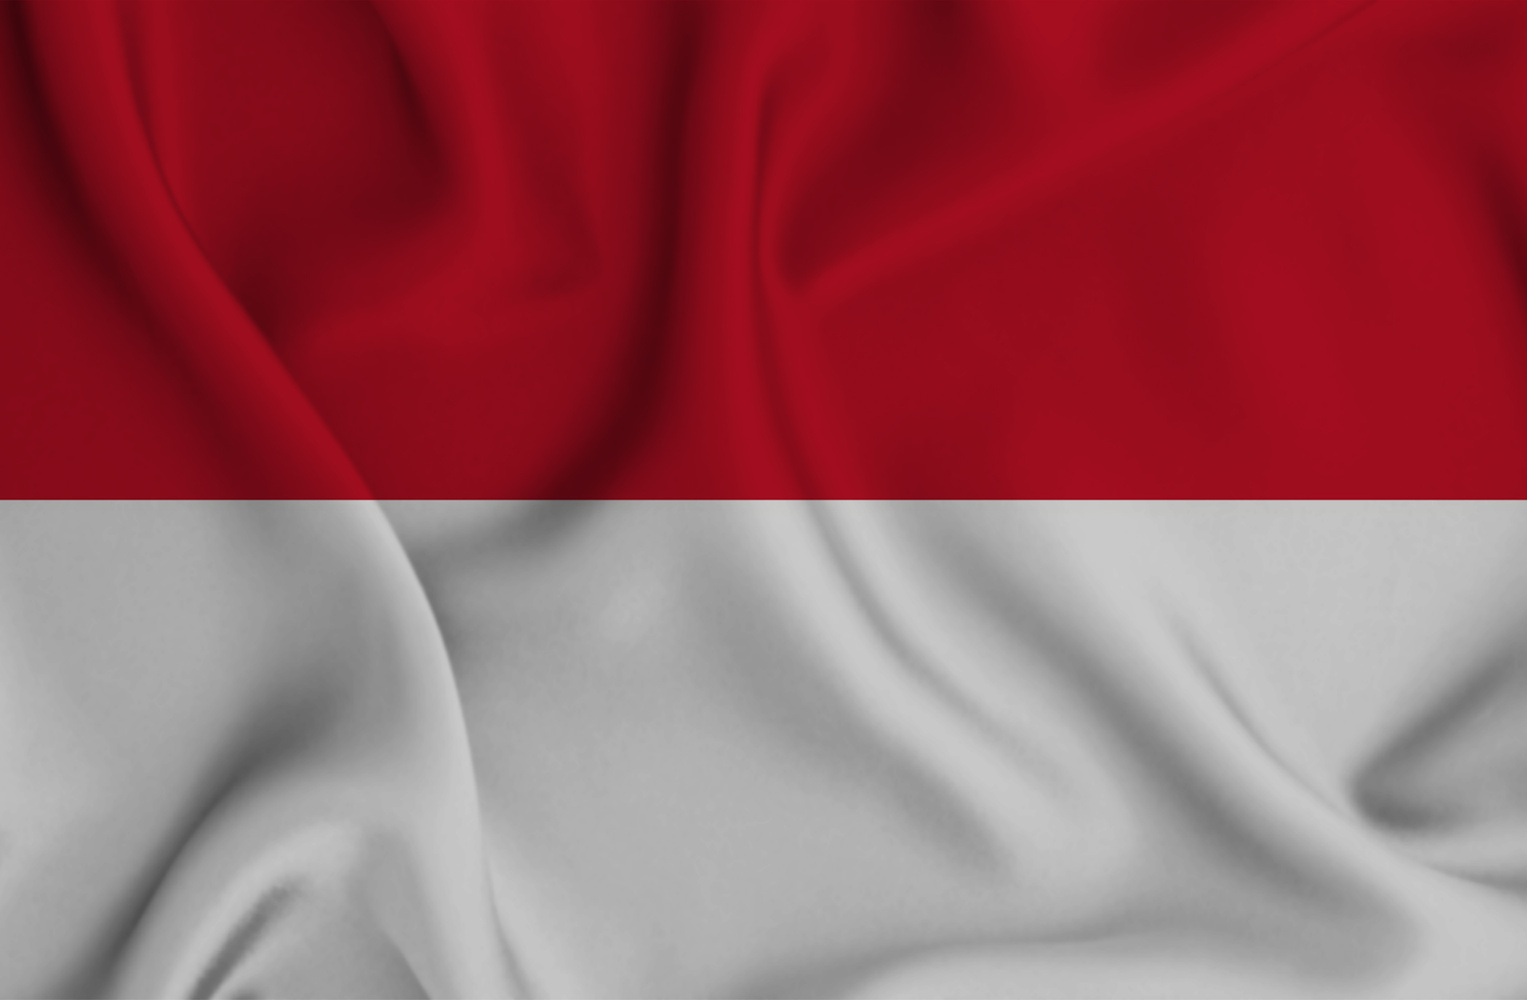 waving flags of indonesia